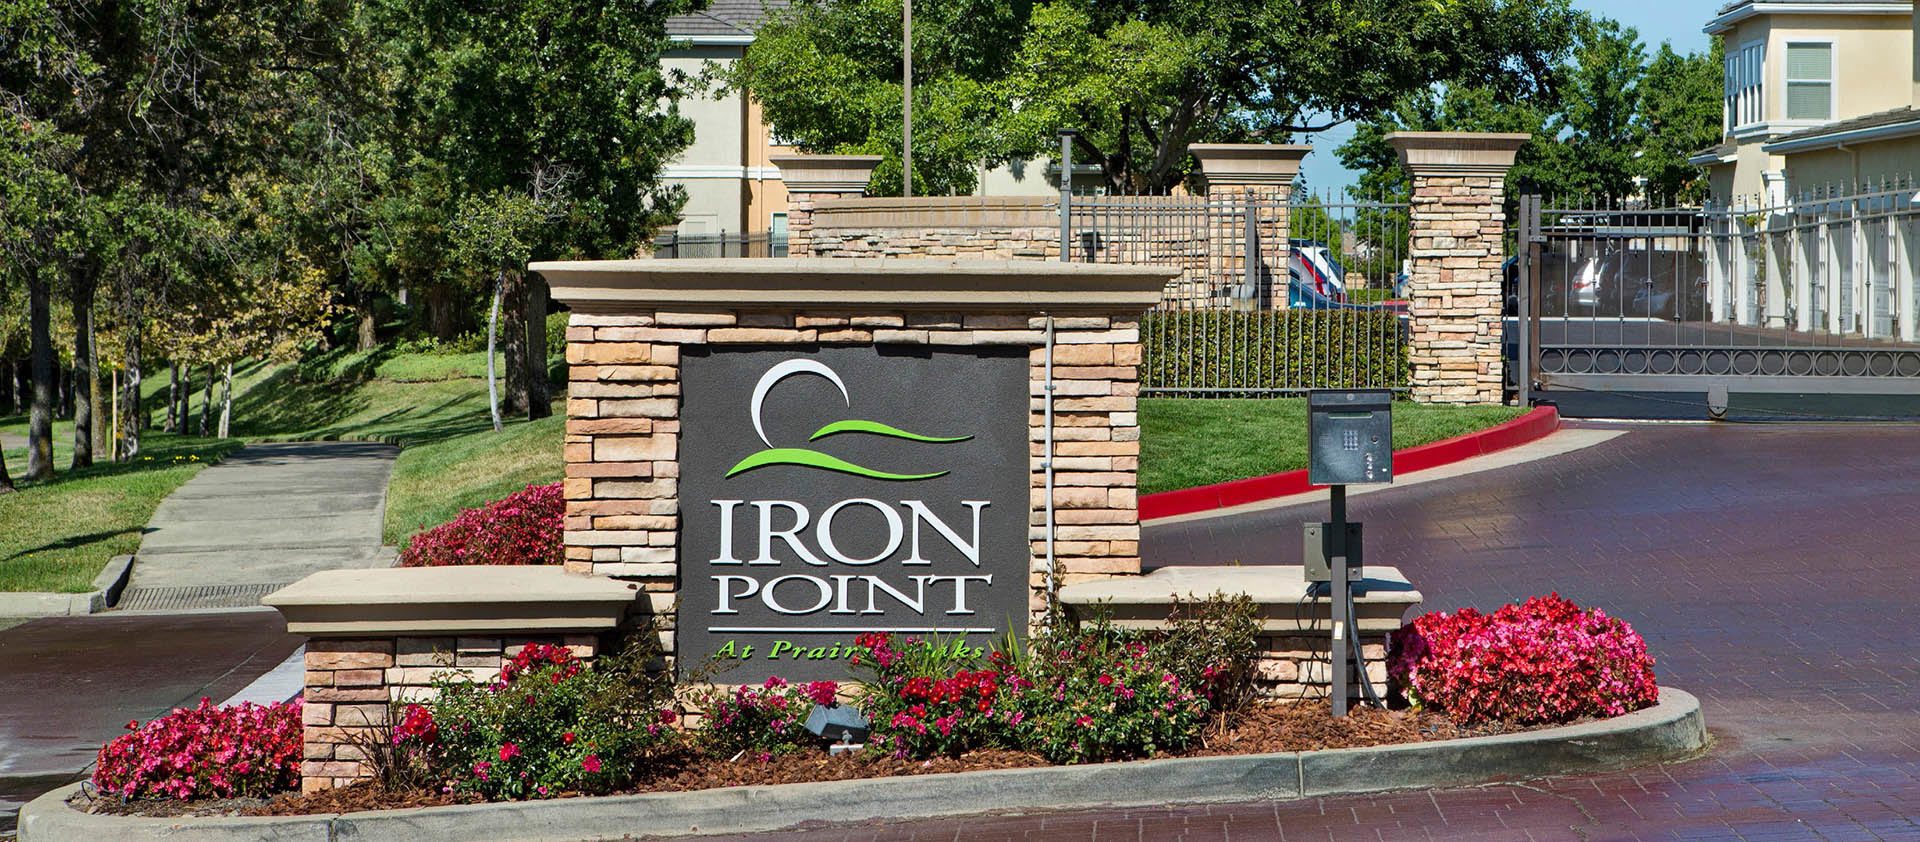 1550 Ironpoint Rd, #2911, Folsom, California 95630, 1 Bedroom Bedrooms, ,1 BathroomBathrooms,Apartment,Furnished,Iron Point,Ironpoint,2,1389